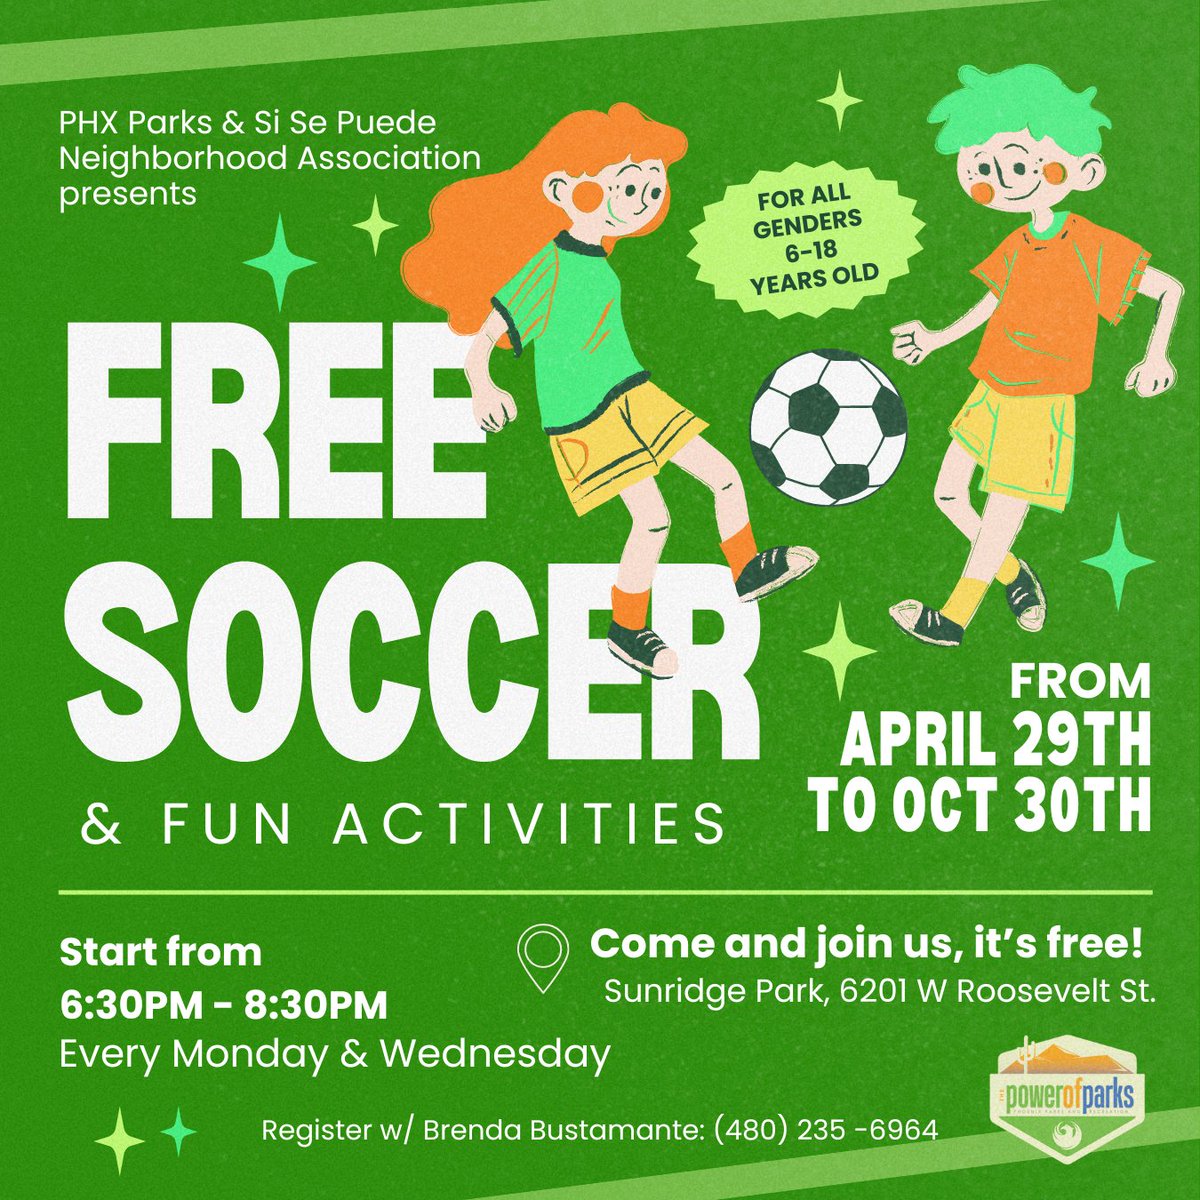 ⚽ Kick off your week with soccer at Sunridge Park for FREE! ☀️ Open for kids aged 6-18. Let's make this a season to remember! 📅 Every Monday & Wednesday, from 6:30PM - 8:30PM 📍 Sunridge Park, 6201 W Roosevelt St, Phoenix, AZ 85043 #phxparks #phxplays #sisepuede #phoenix